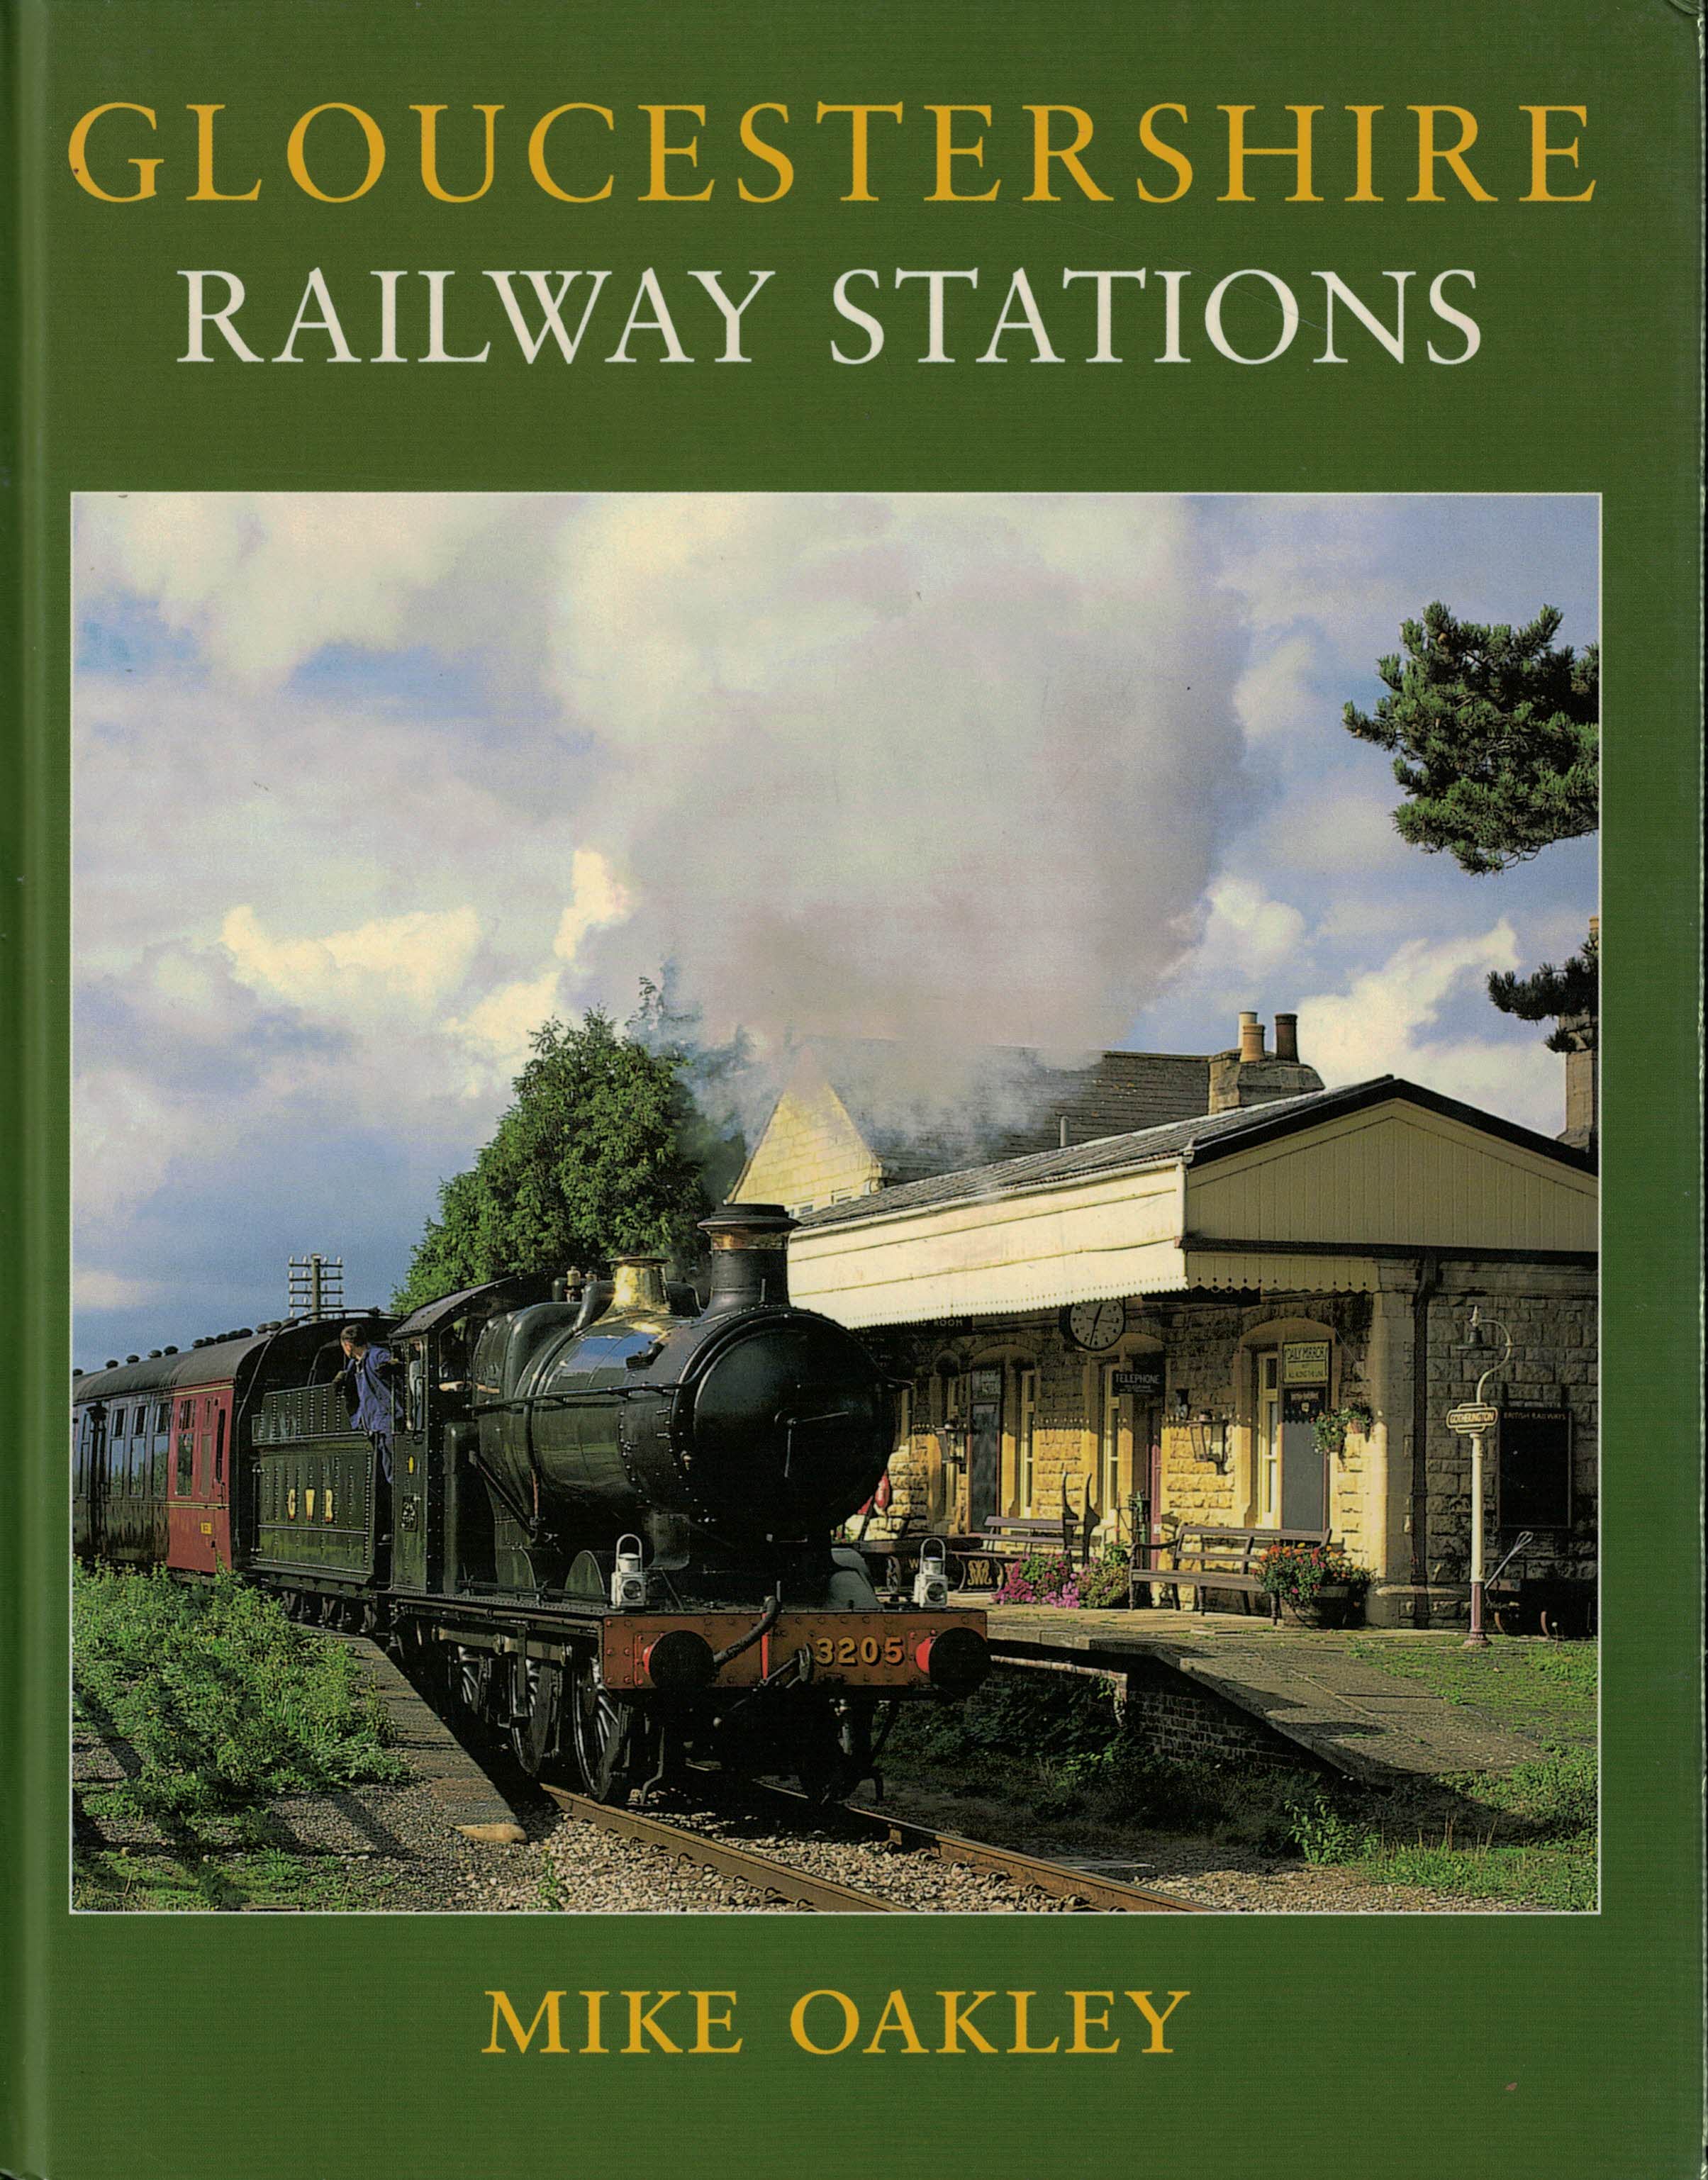 Gloucester Railway Stations. Signed copy.